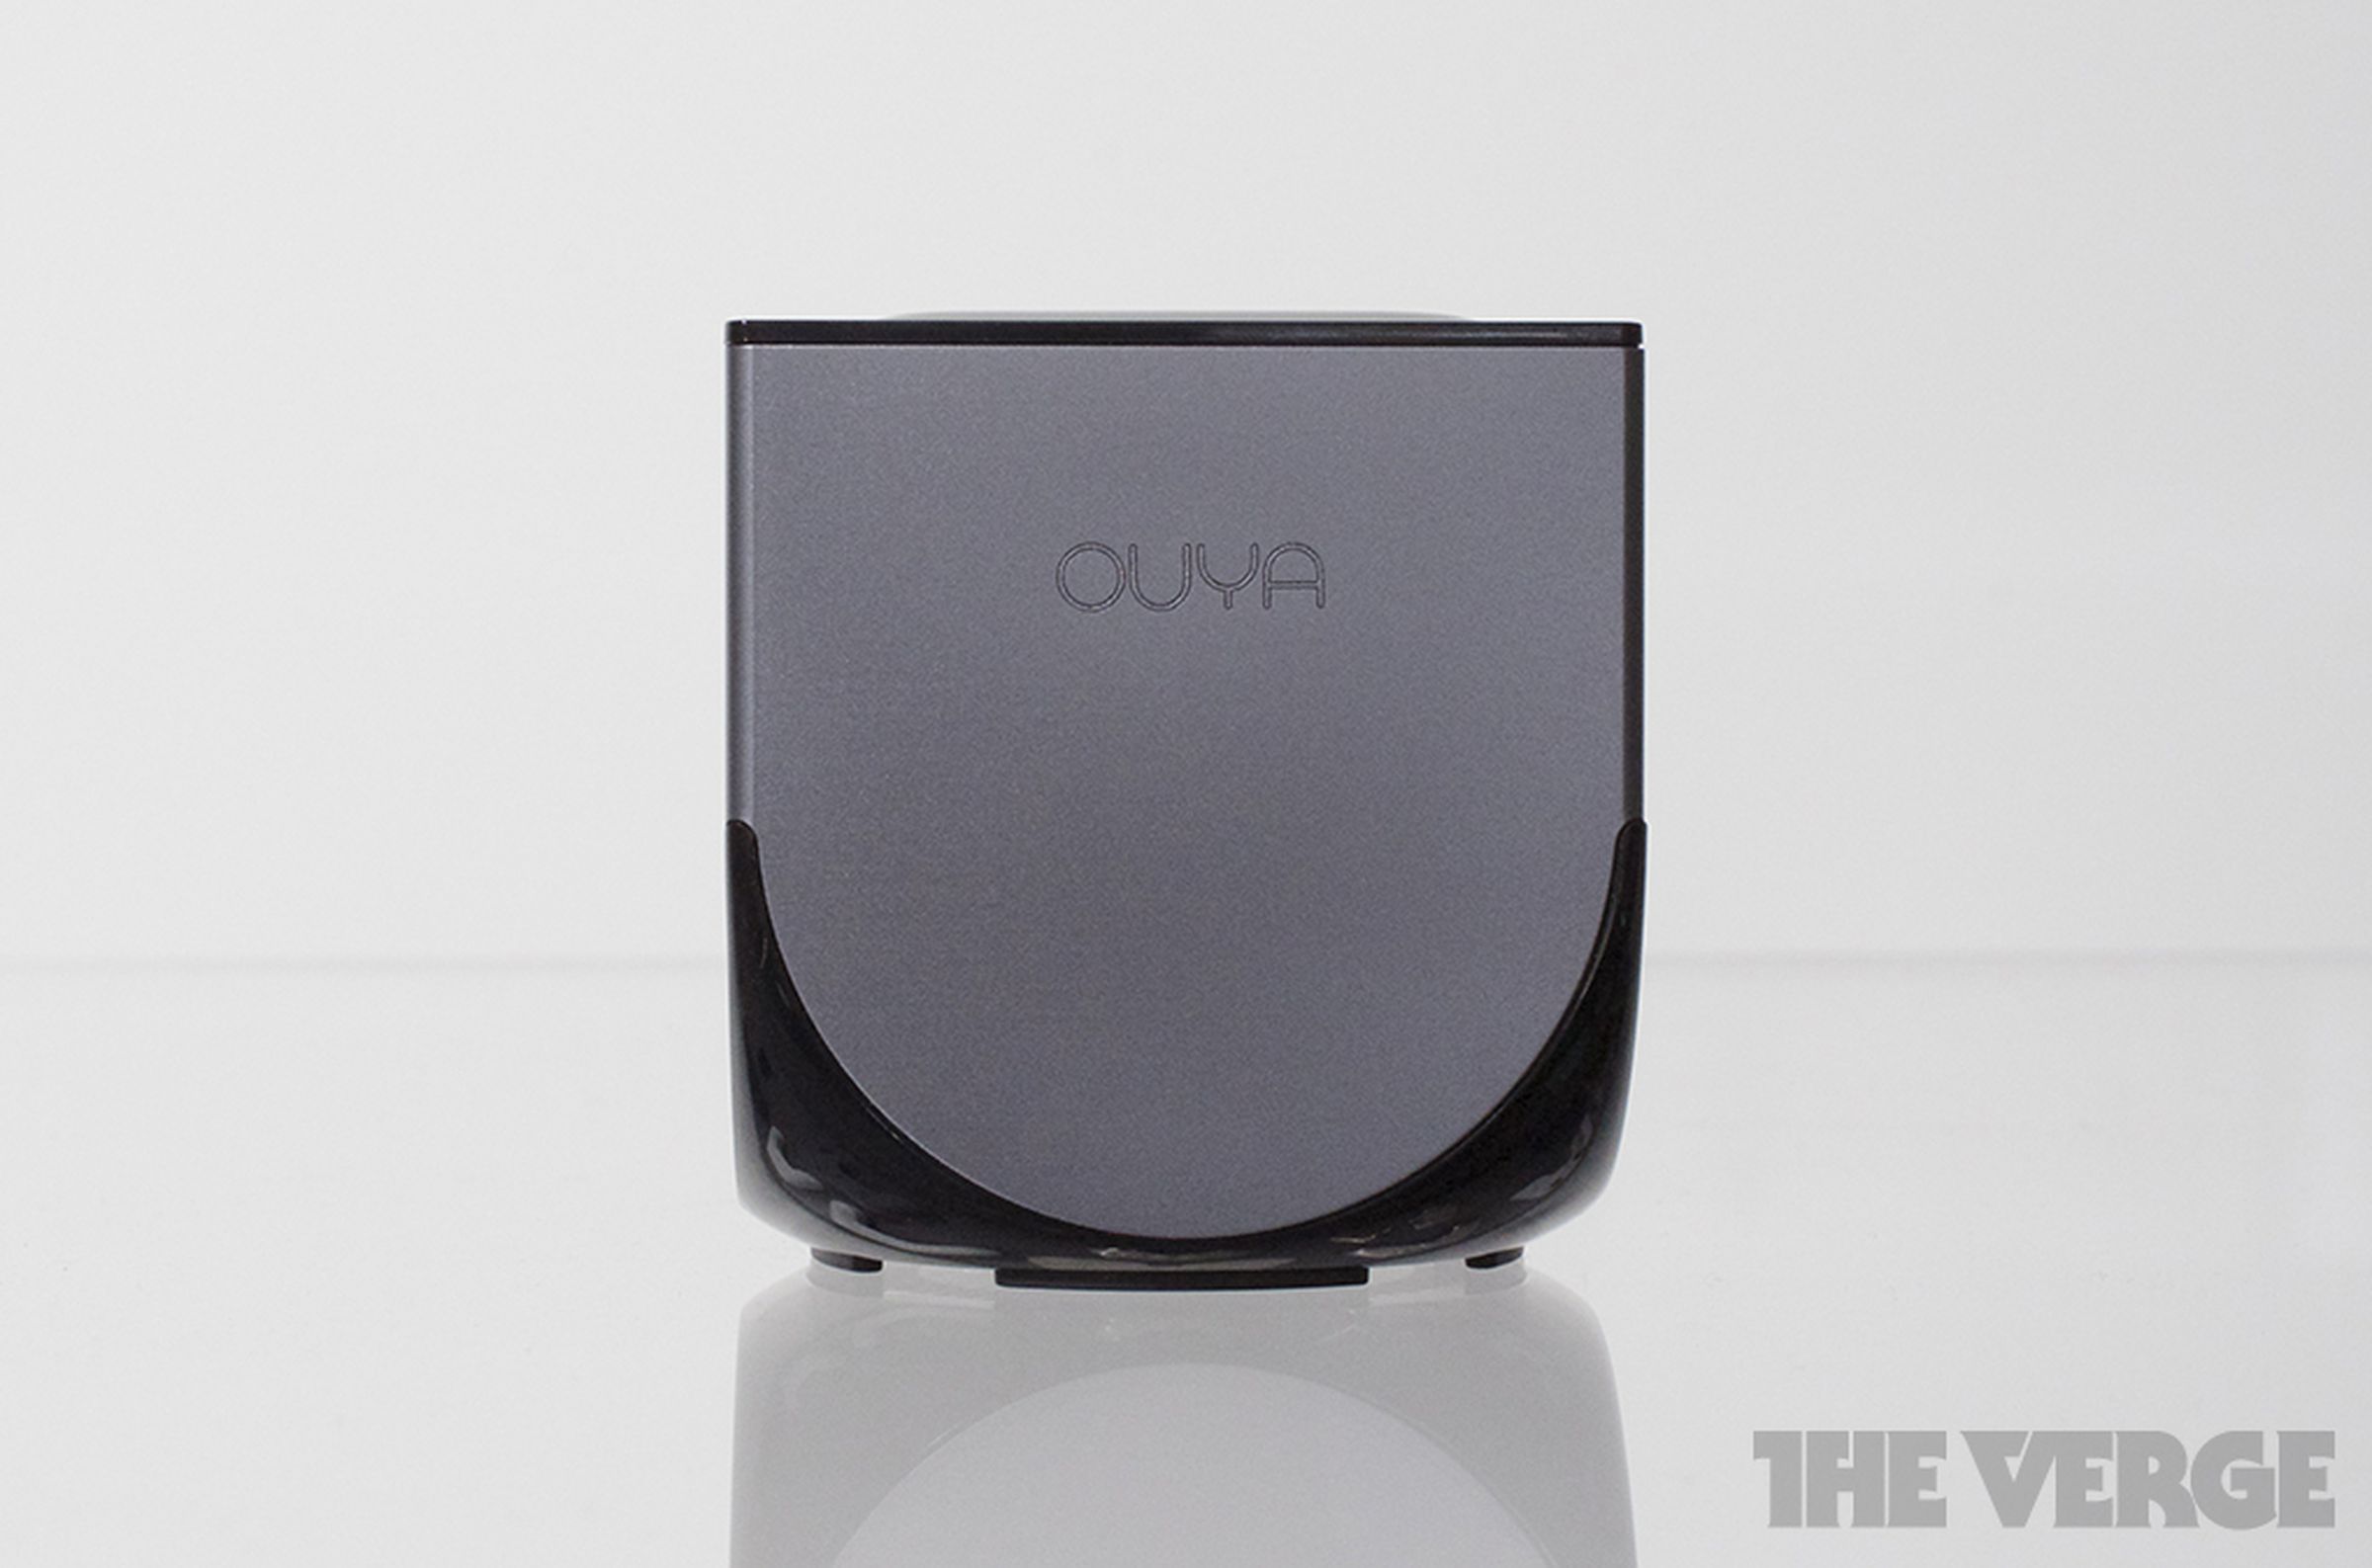 Ouya Android game console hands-on photos